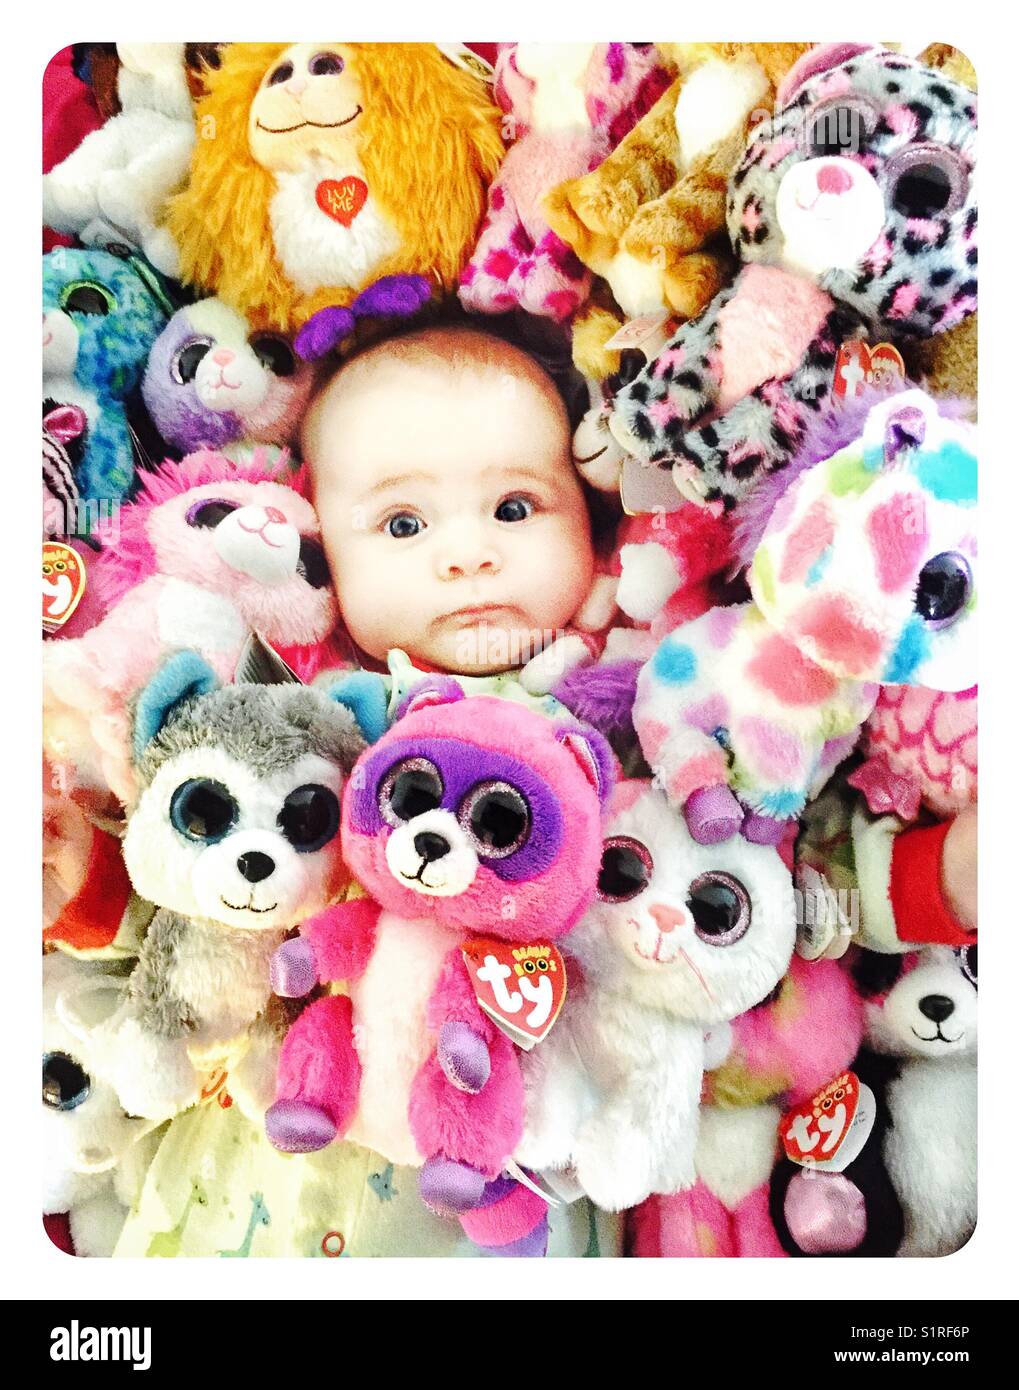 Baby buried in Ty Beanie Boo toys Stock Photo